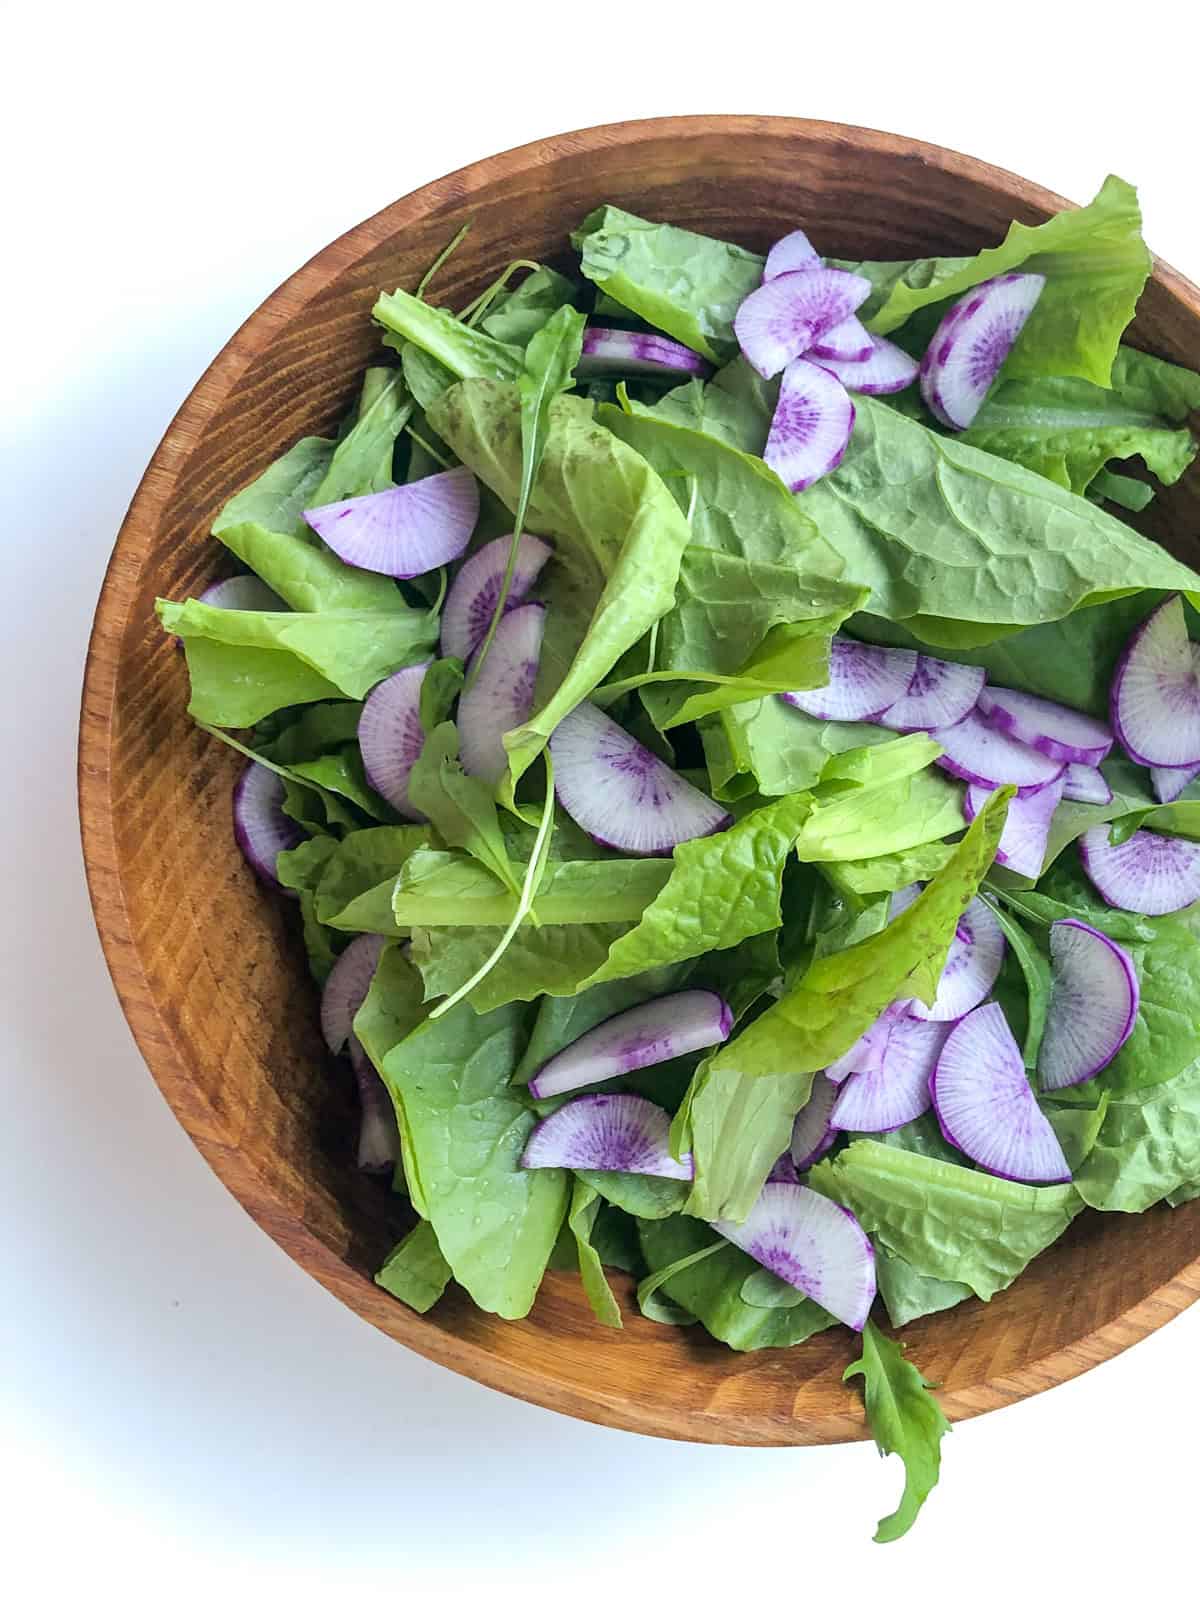 An image of a wooden bowl filled with fresh salad greens and purple daikon radishes.